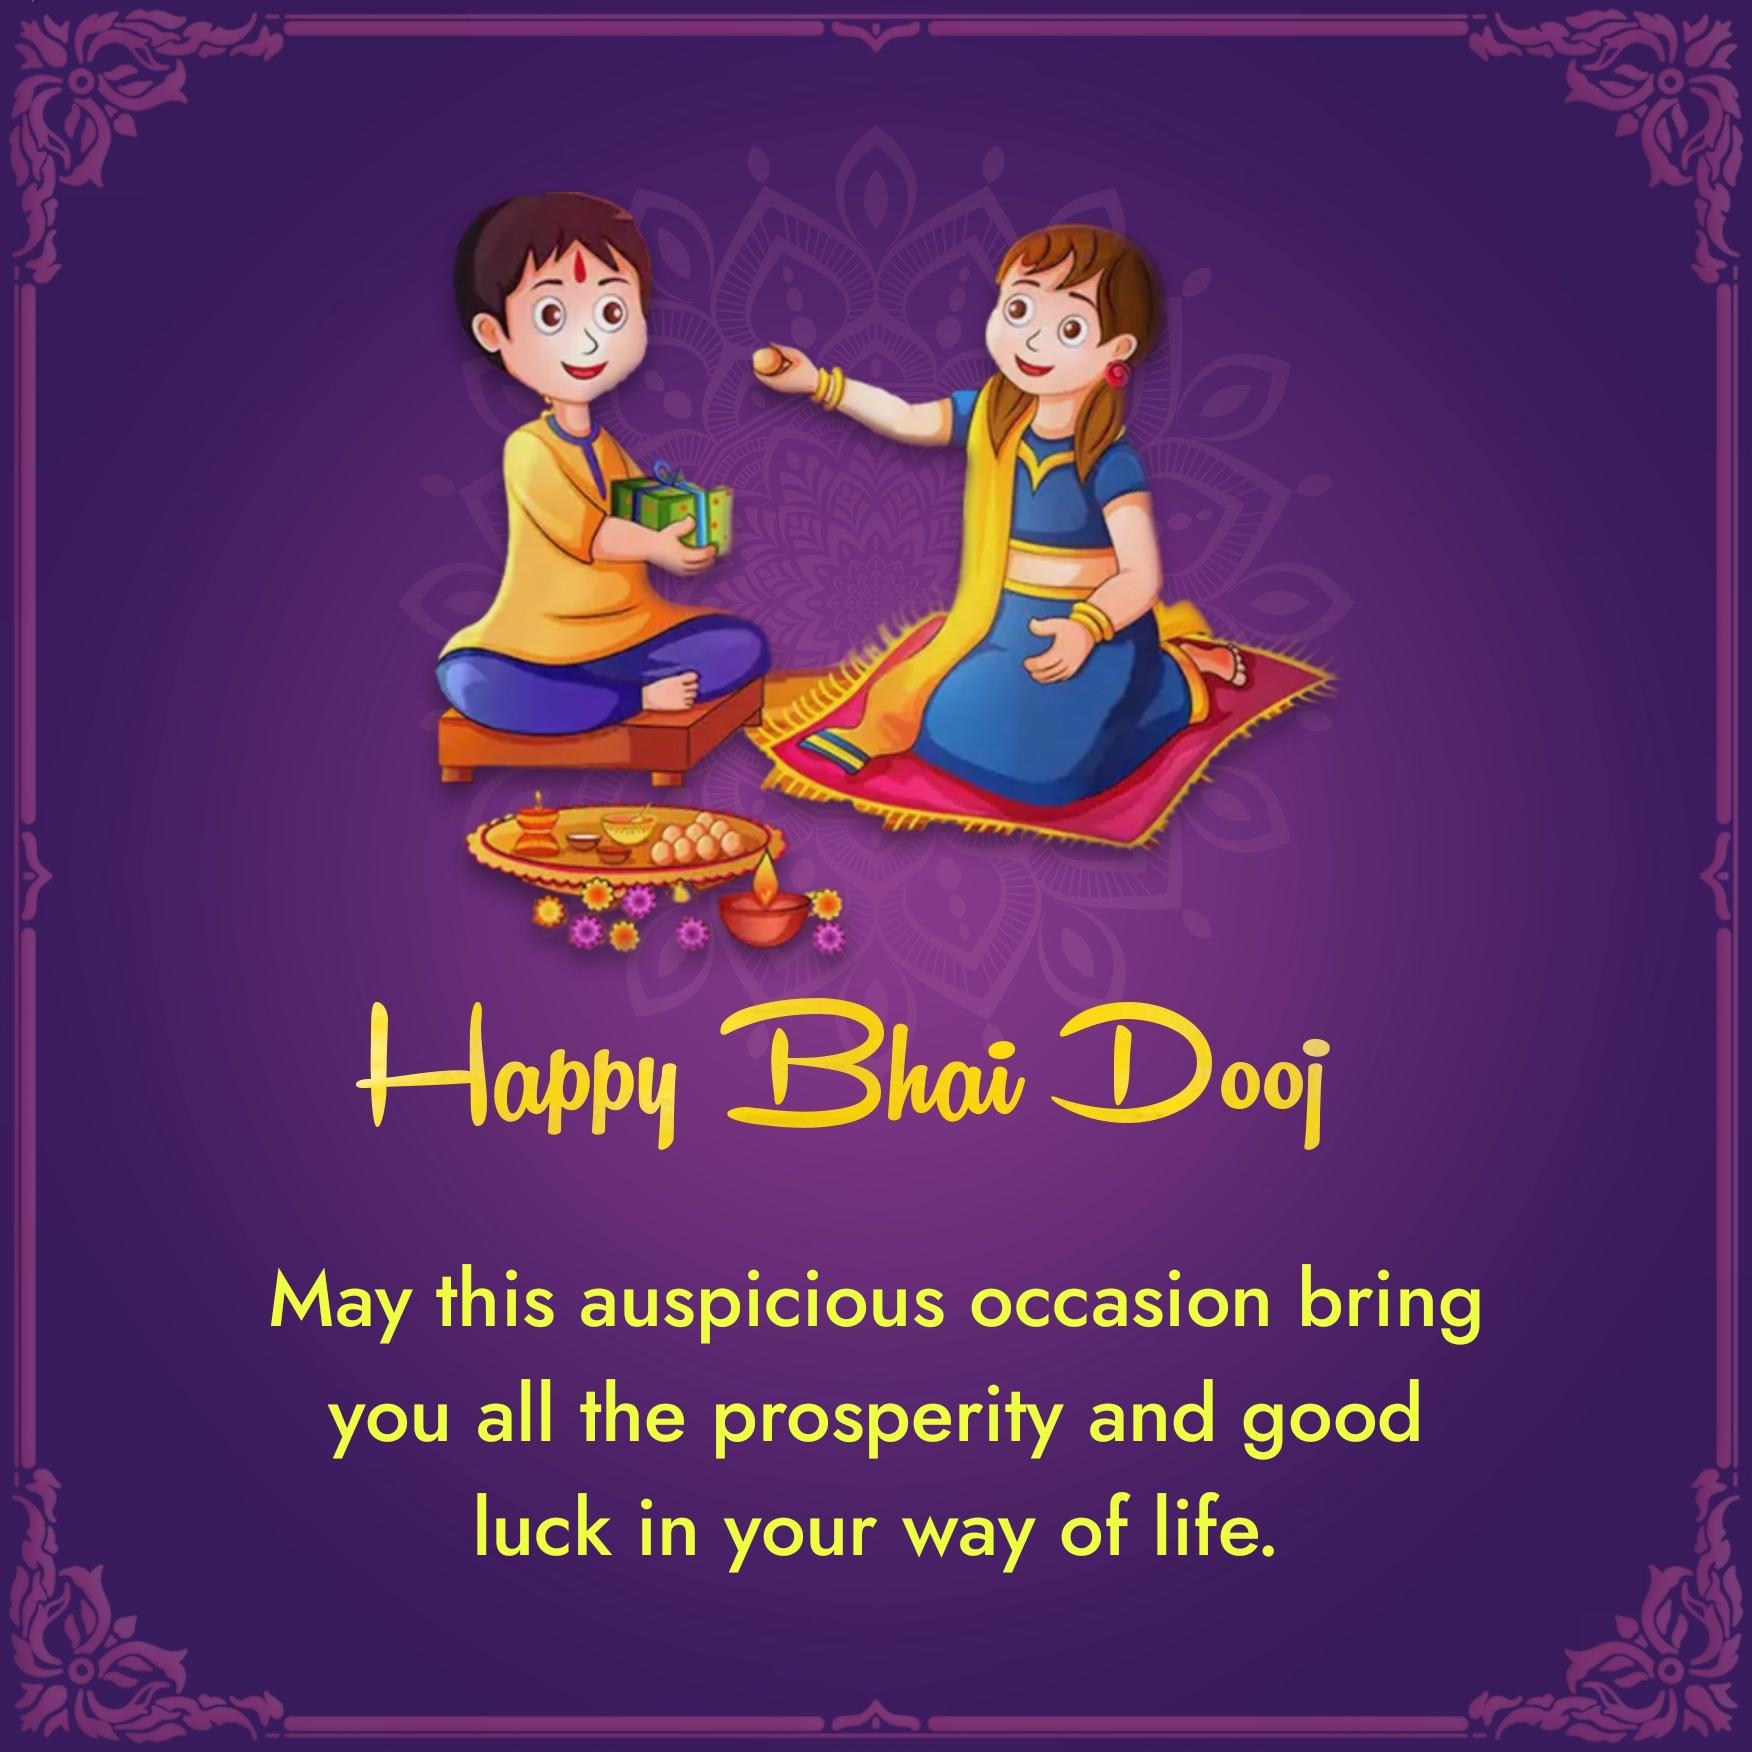 May this auspicious occasion bring you all the prosperity